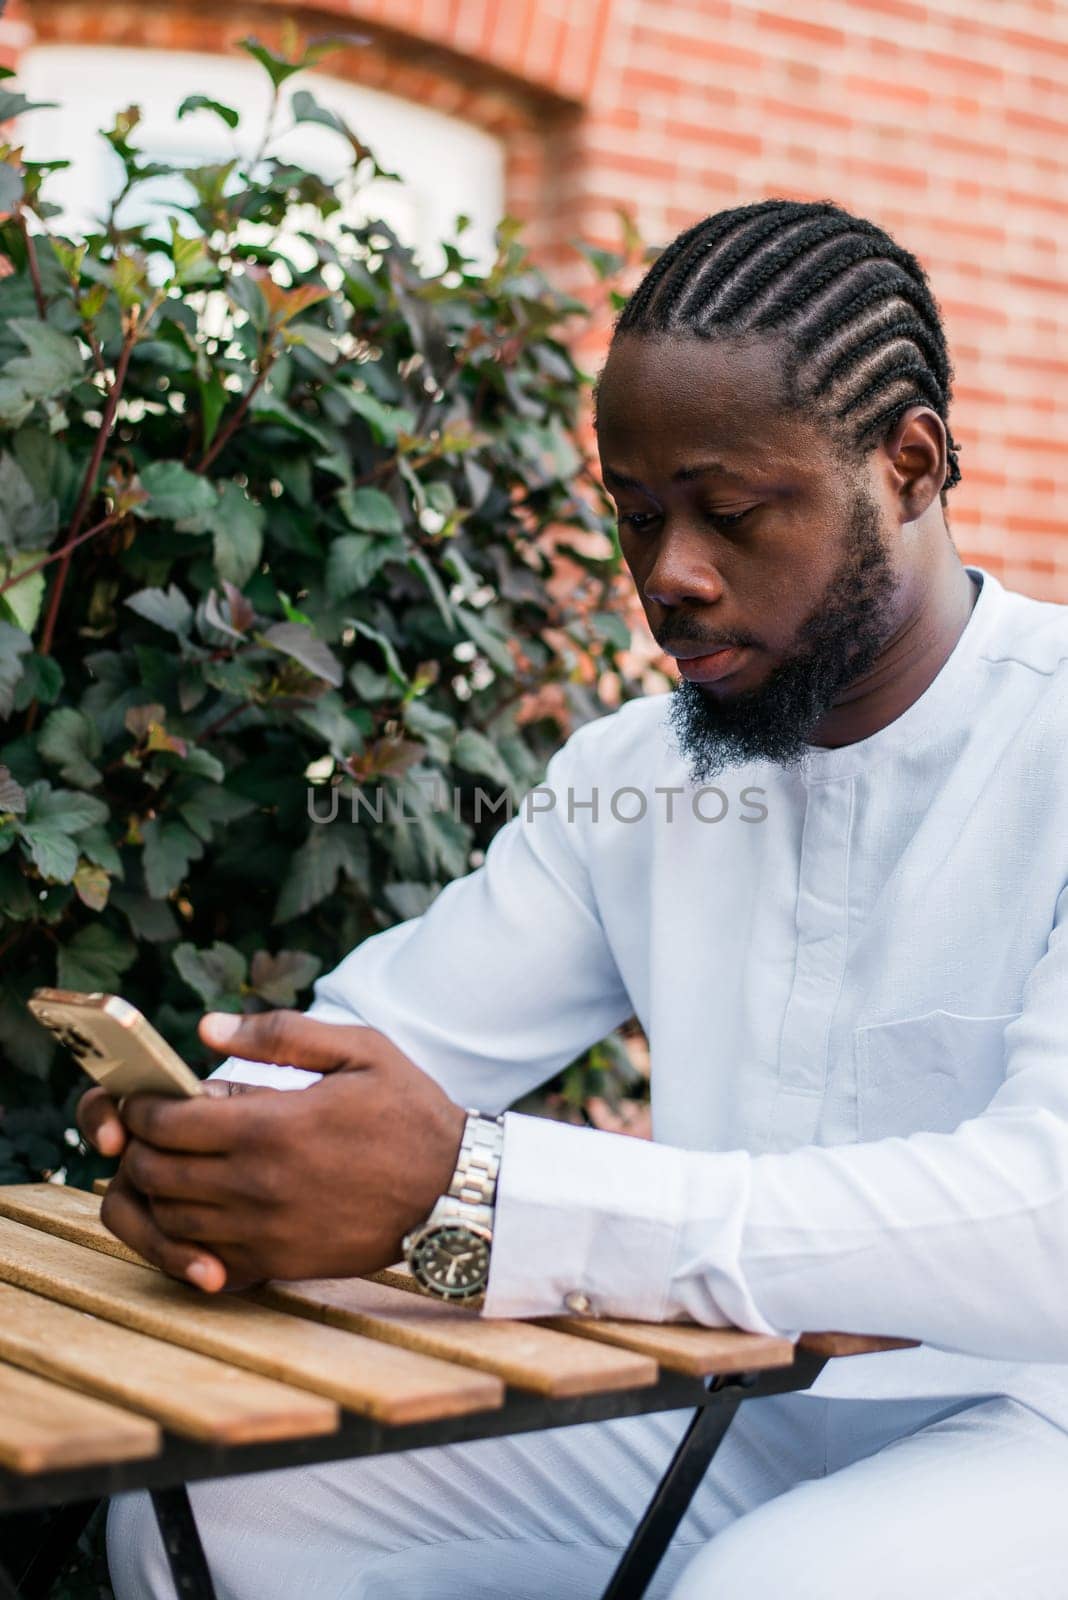 Millennial generation african american man typing sms outdoor 5g internet concept. High speed internet on phone and chatting on social networks and blog concept by Satura86